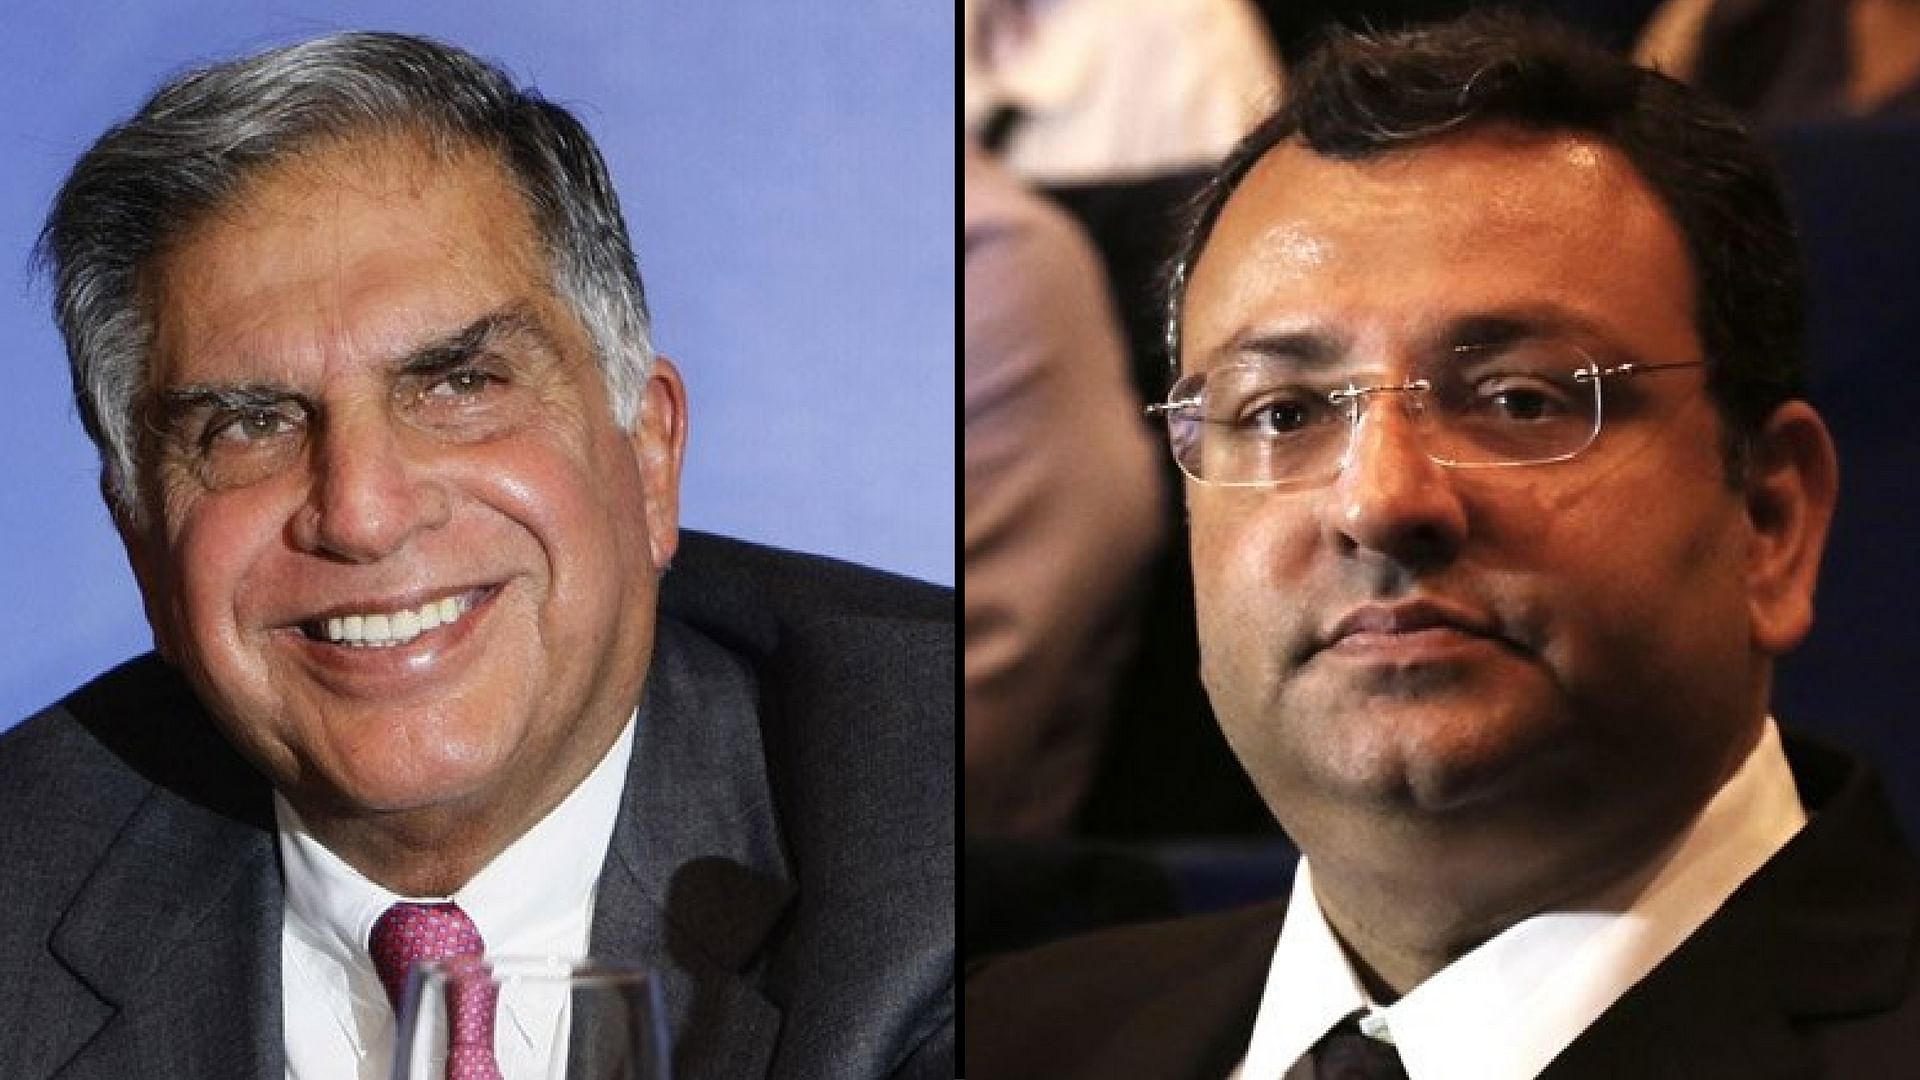 Ratan Tata and Cyrus Mistry have lawyered up. (Photo: <b>The Quint</b>)